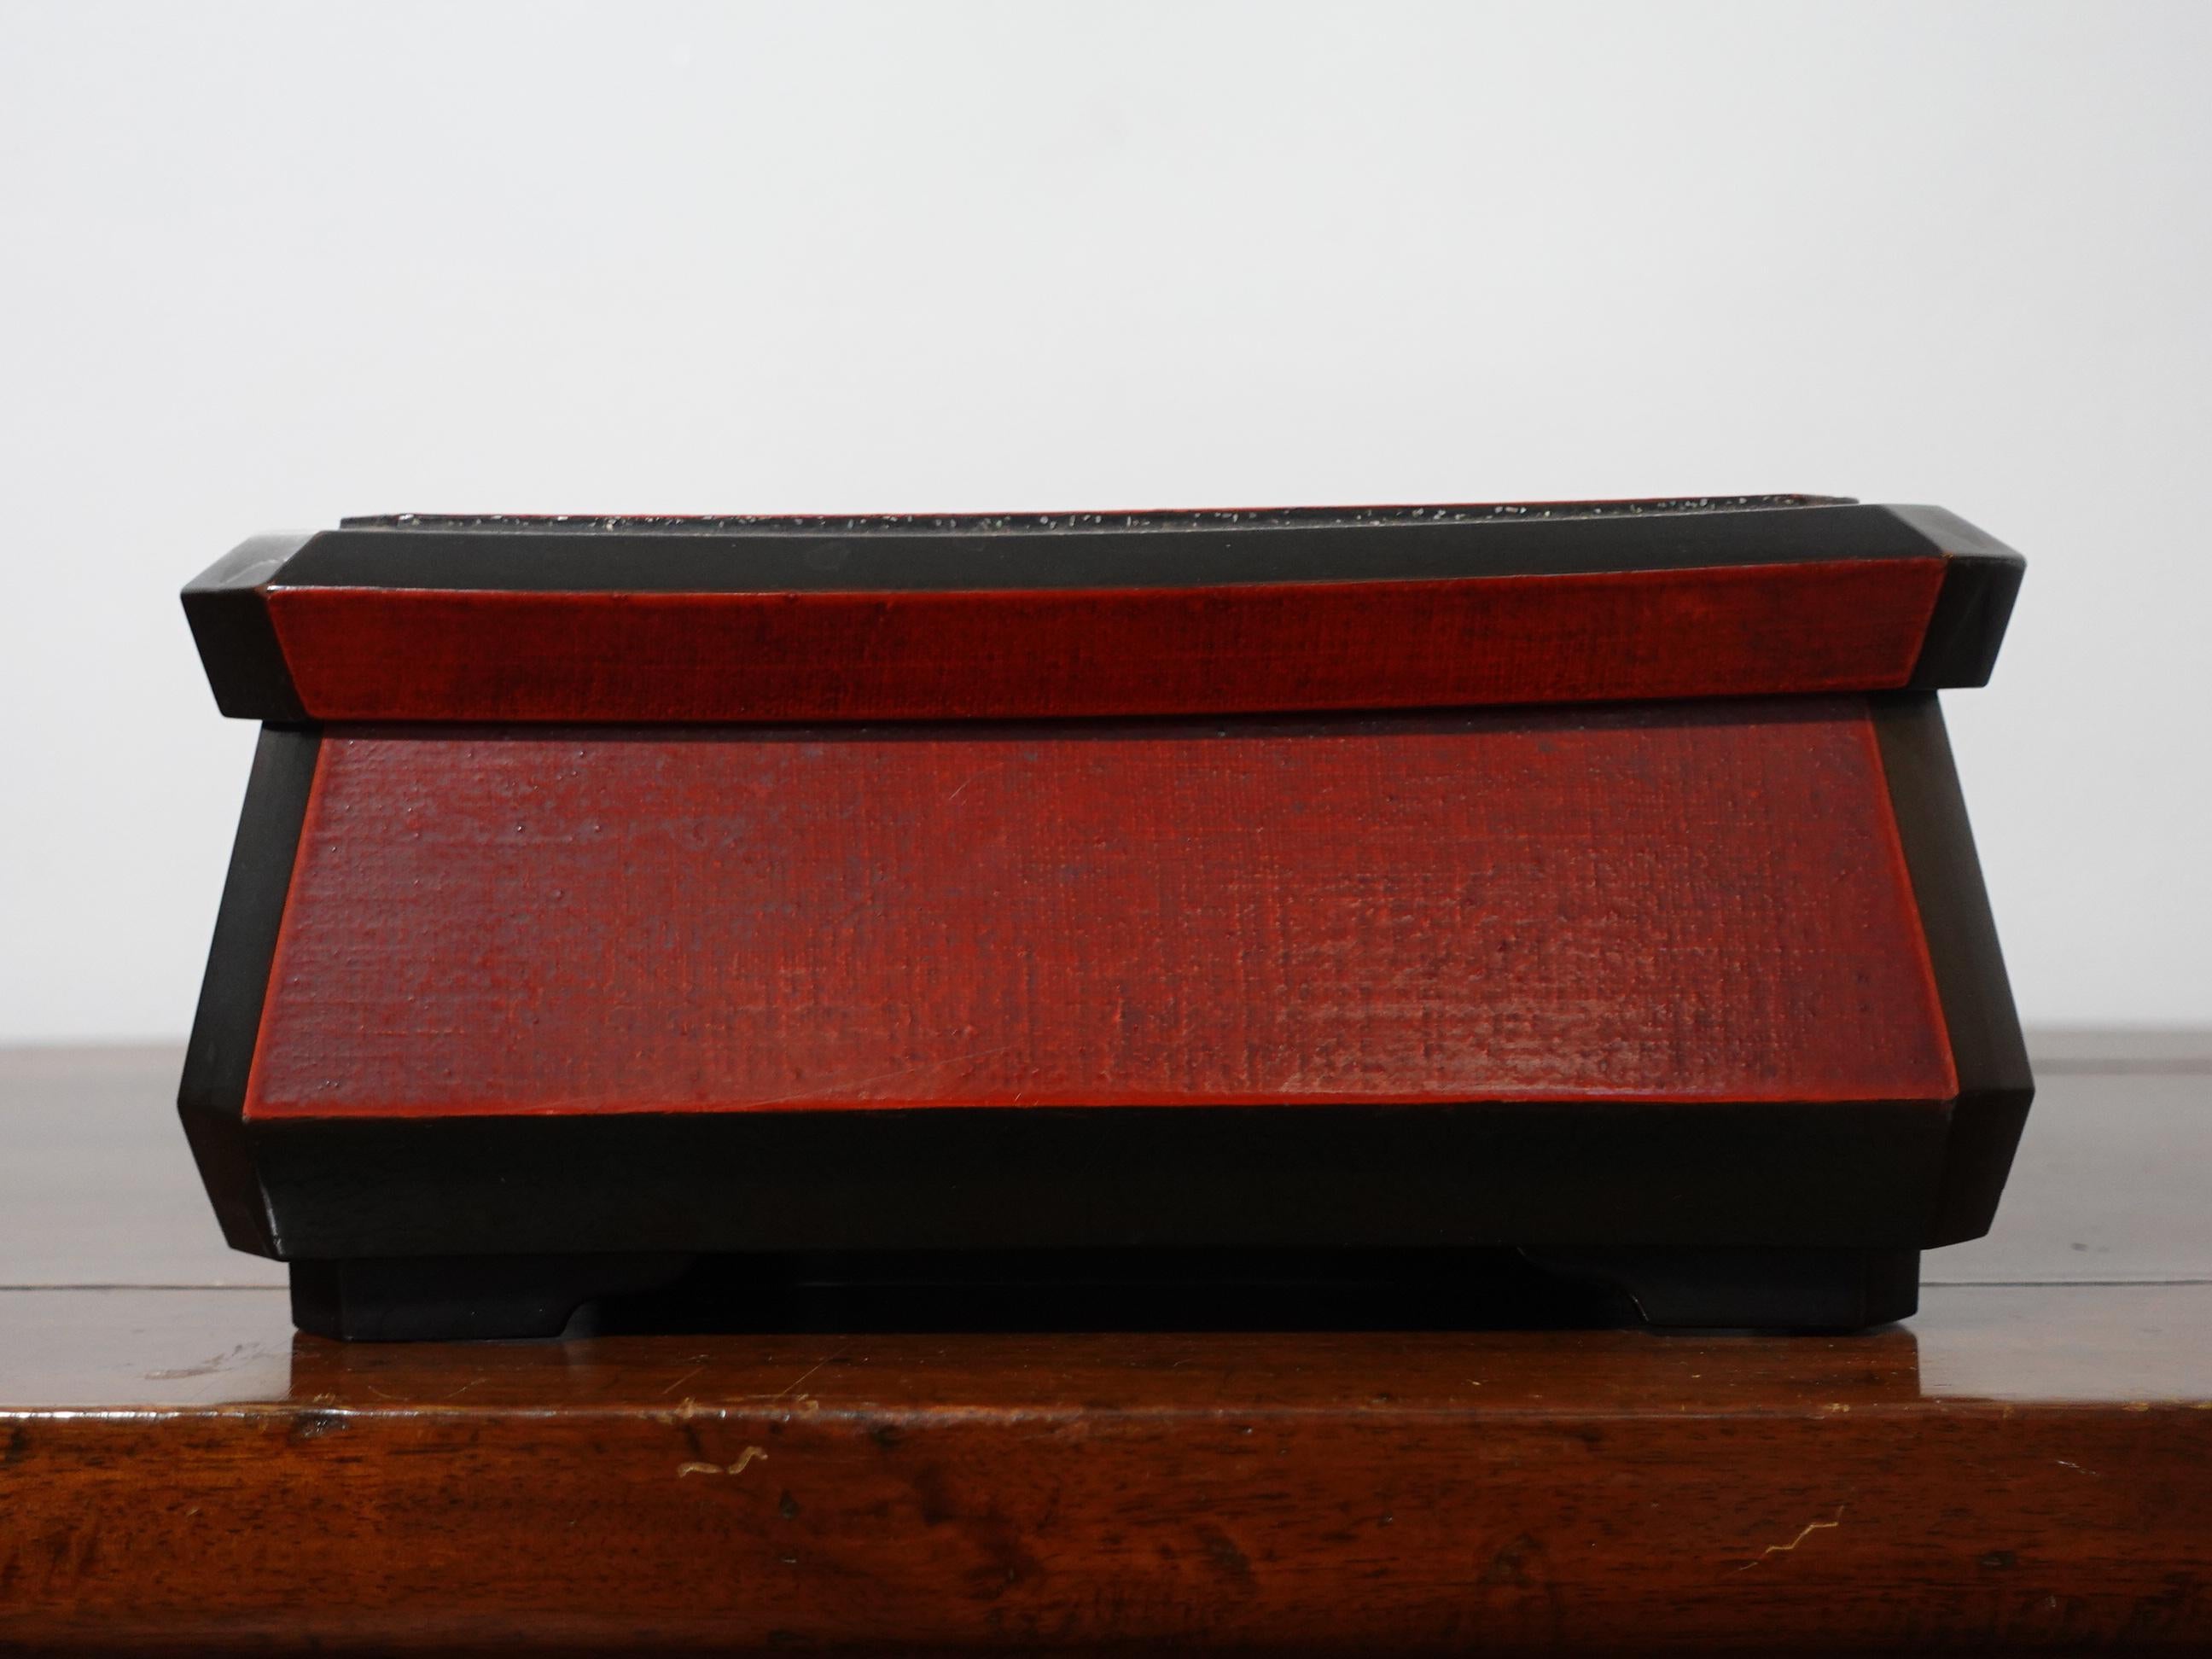 Japanese late Meiji period A Large Organizer Red Lacquered Box, Ric.052 For Sale 4